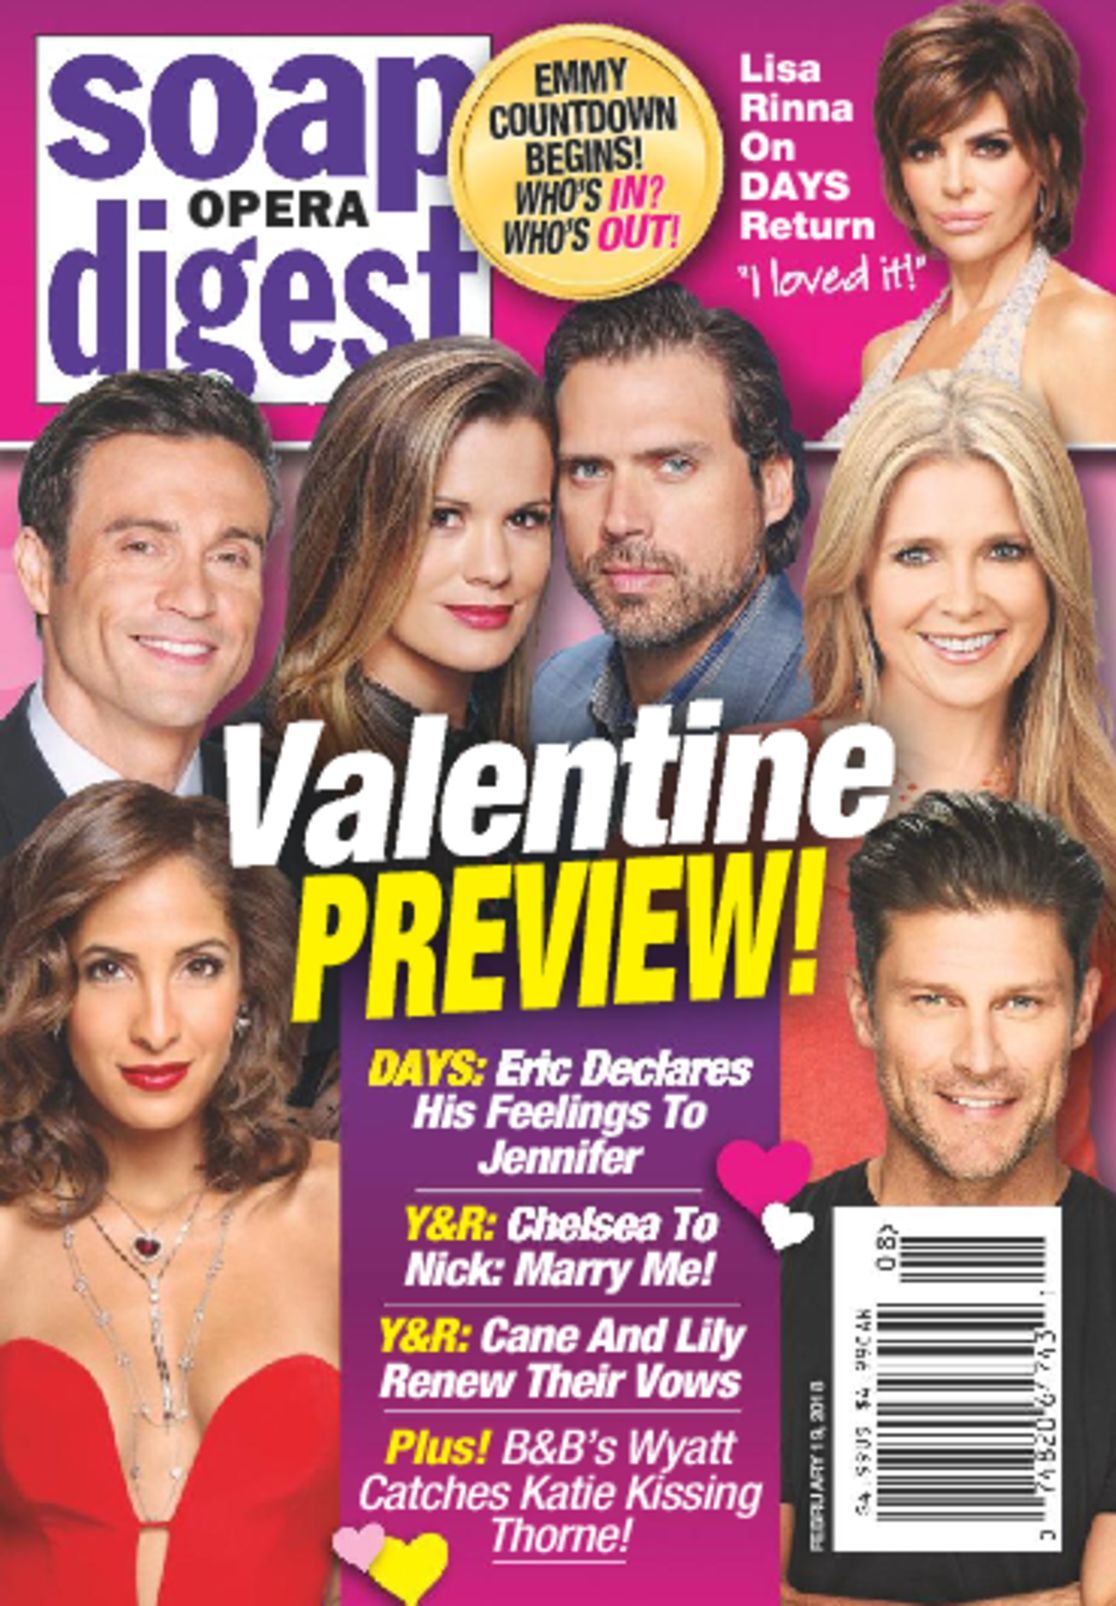 soap opera digest latest cover